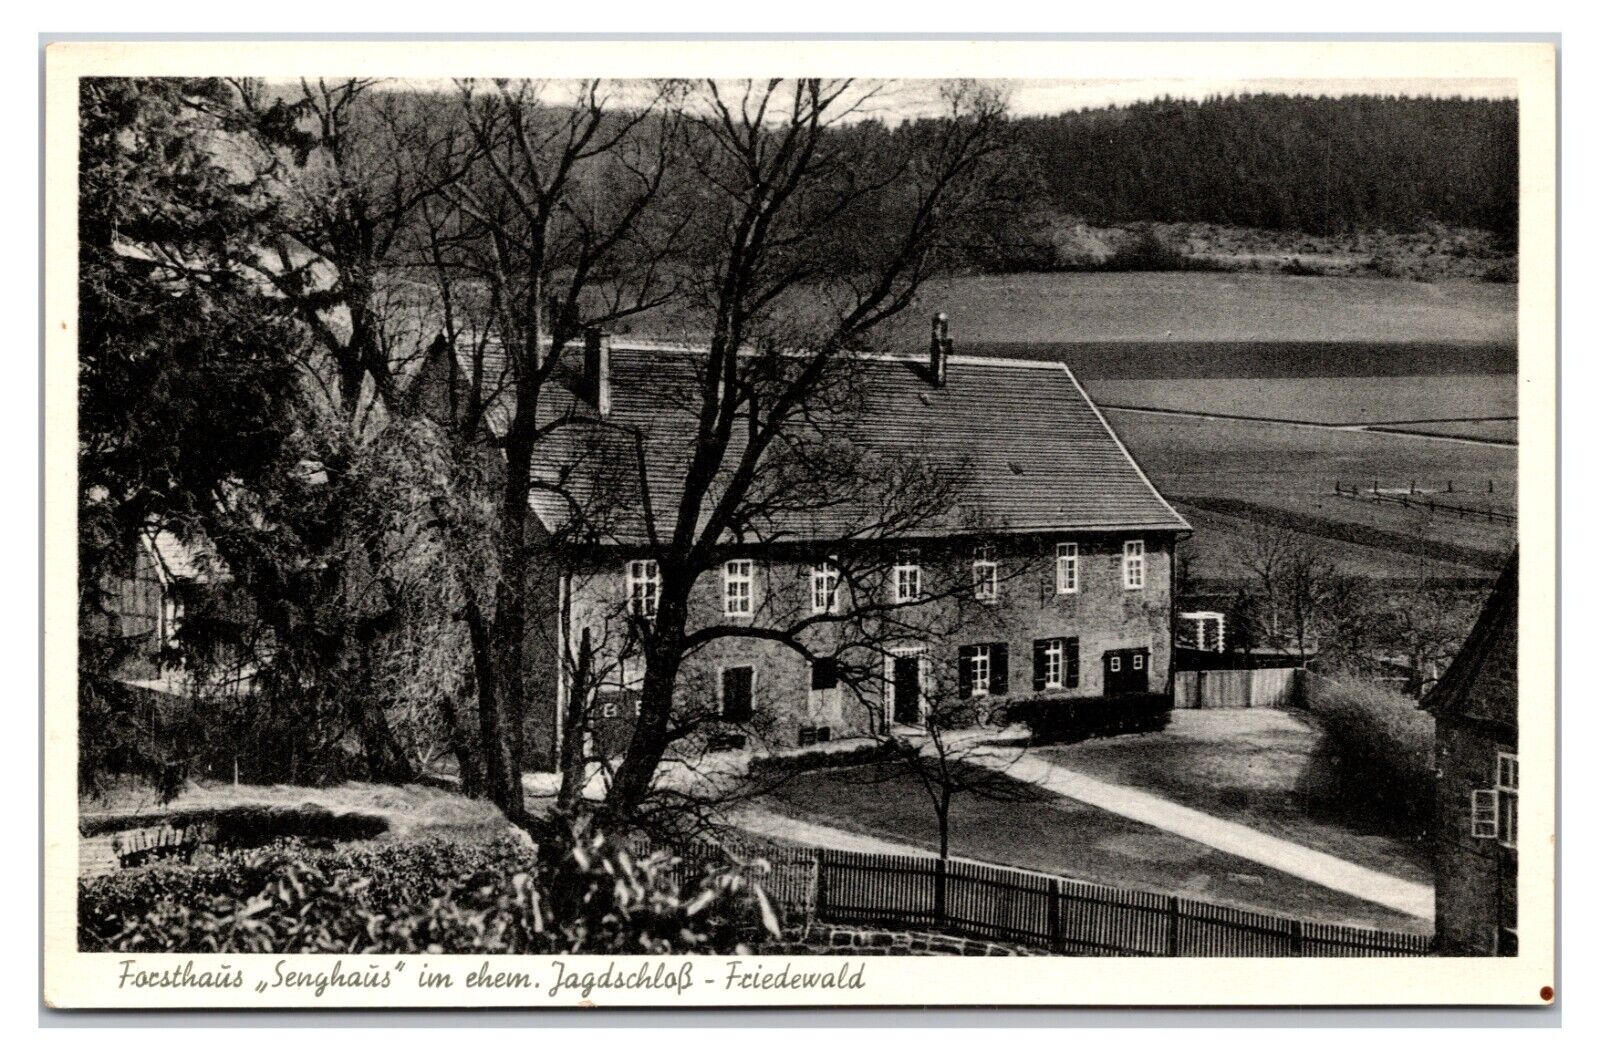 VTG 1920s - Forester's House - Friedewald, Germany Postcard (UnPosted) *RPPC*